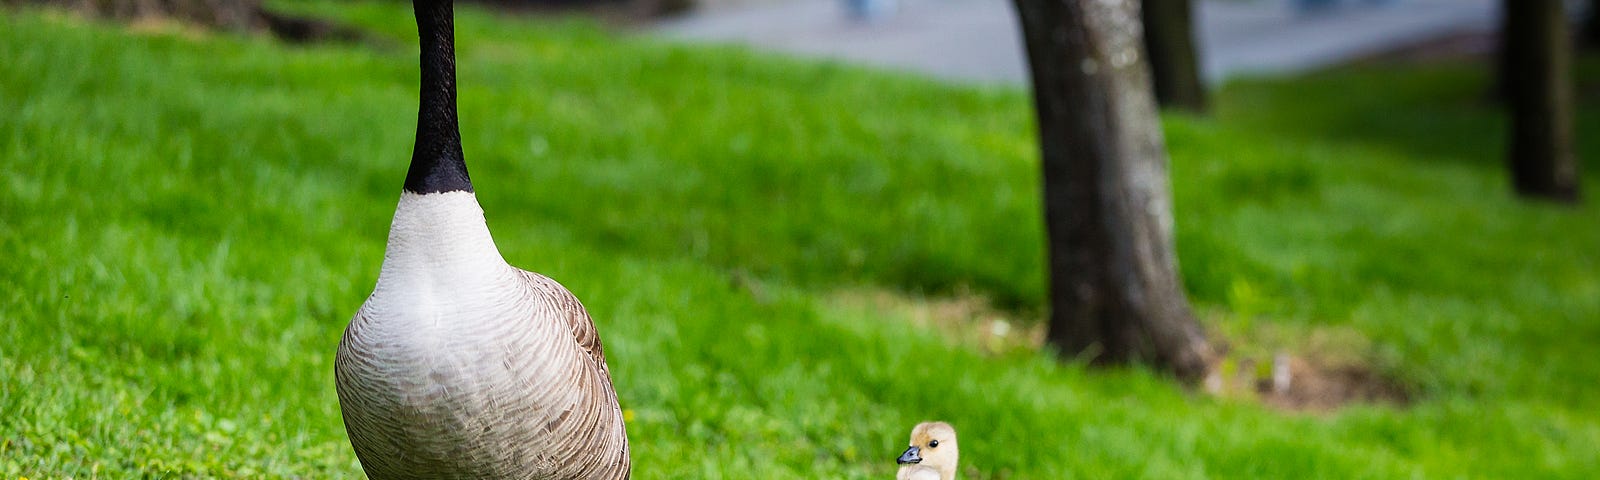 Mother Goose and goslings on grassy lawn